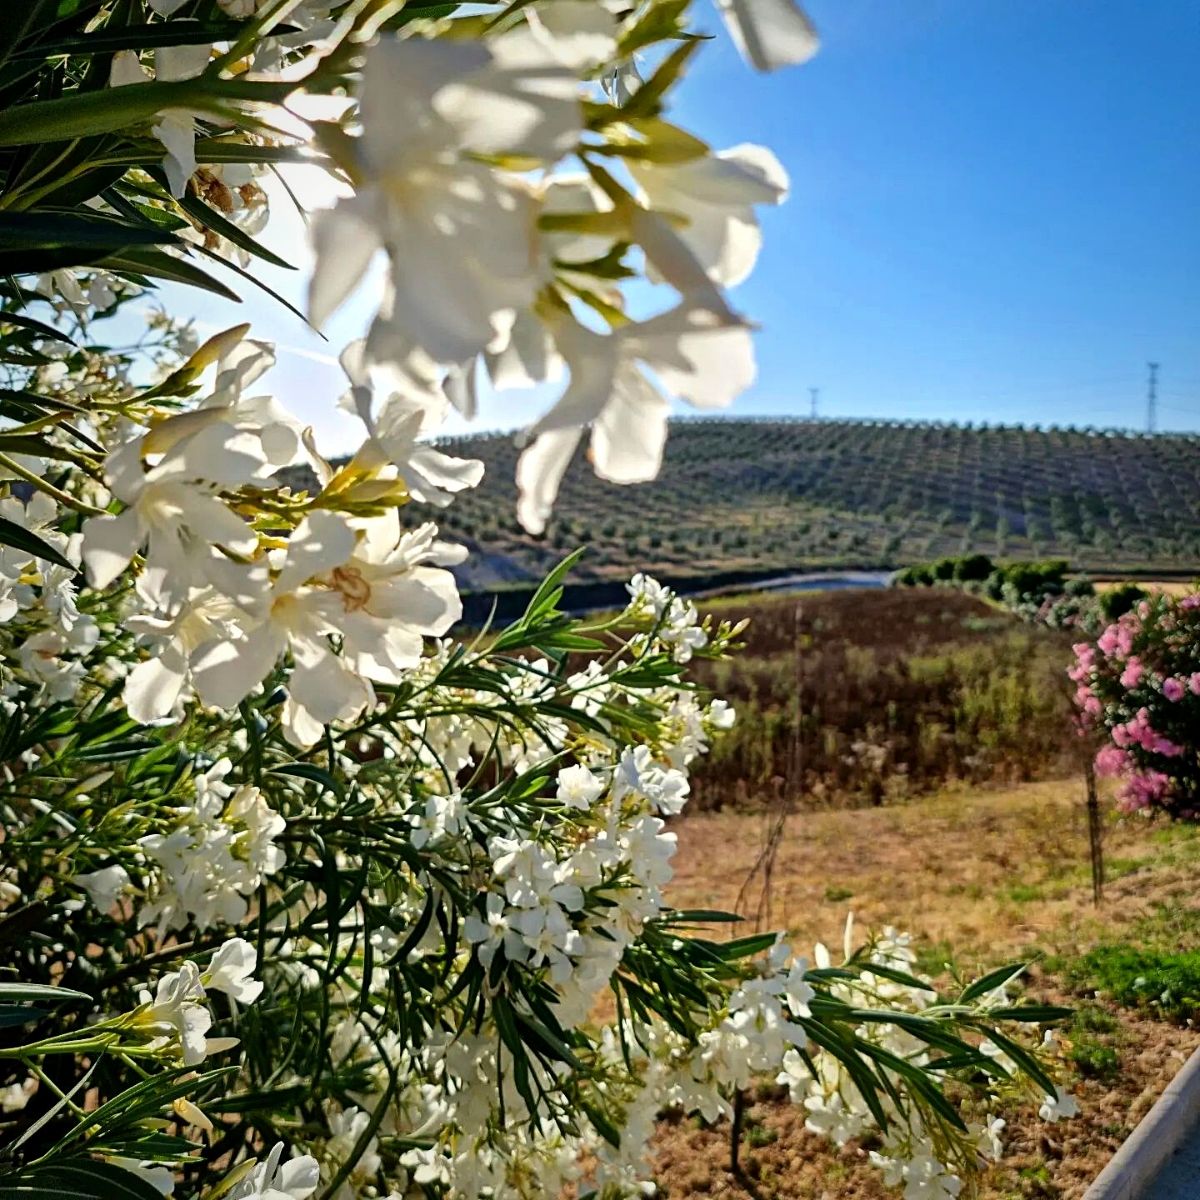 National Olive Day's blooming flowers of the olive tree